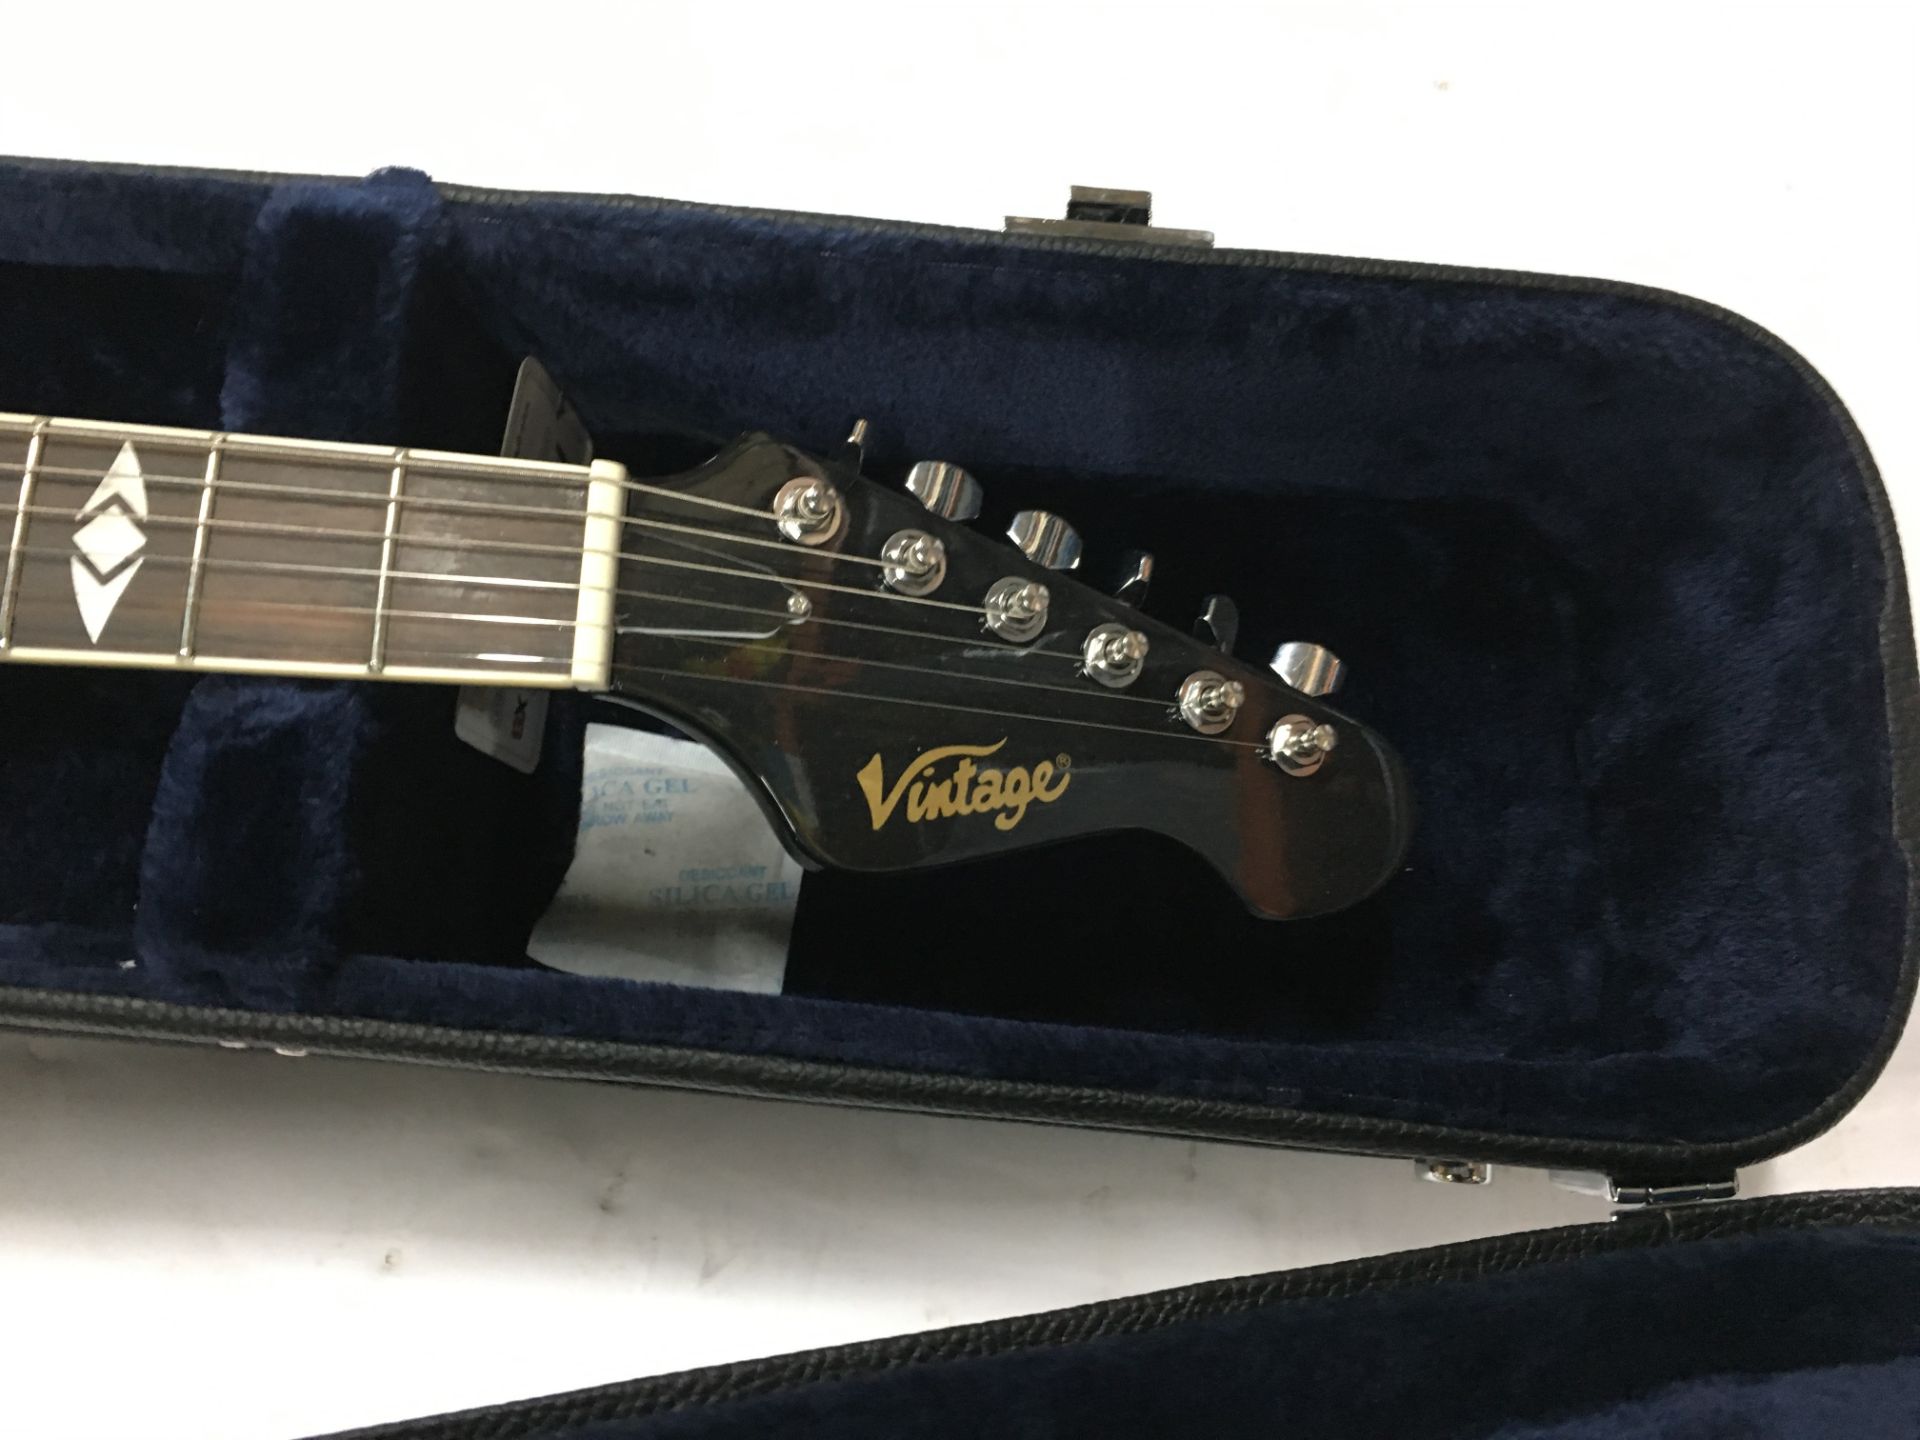 Vintage Electric Guitar in Black | CW15110103 | New | In Case - Image 3 of 3